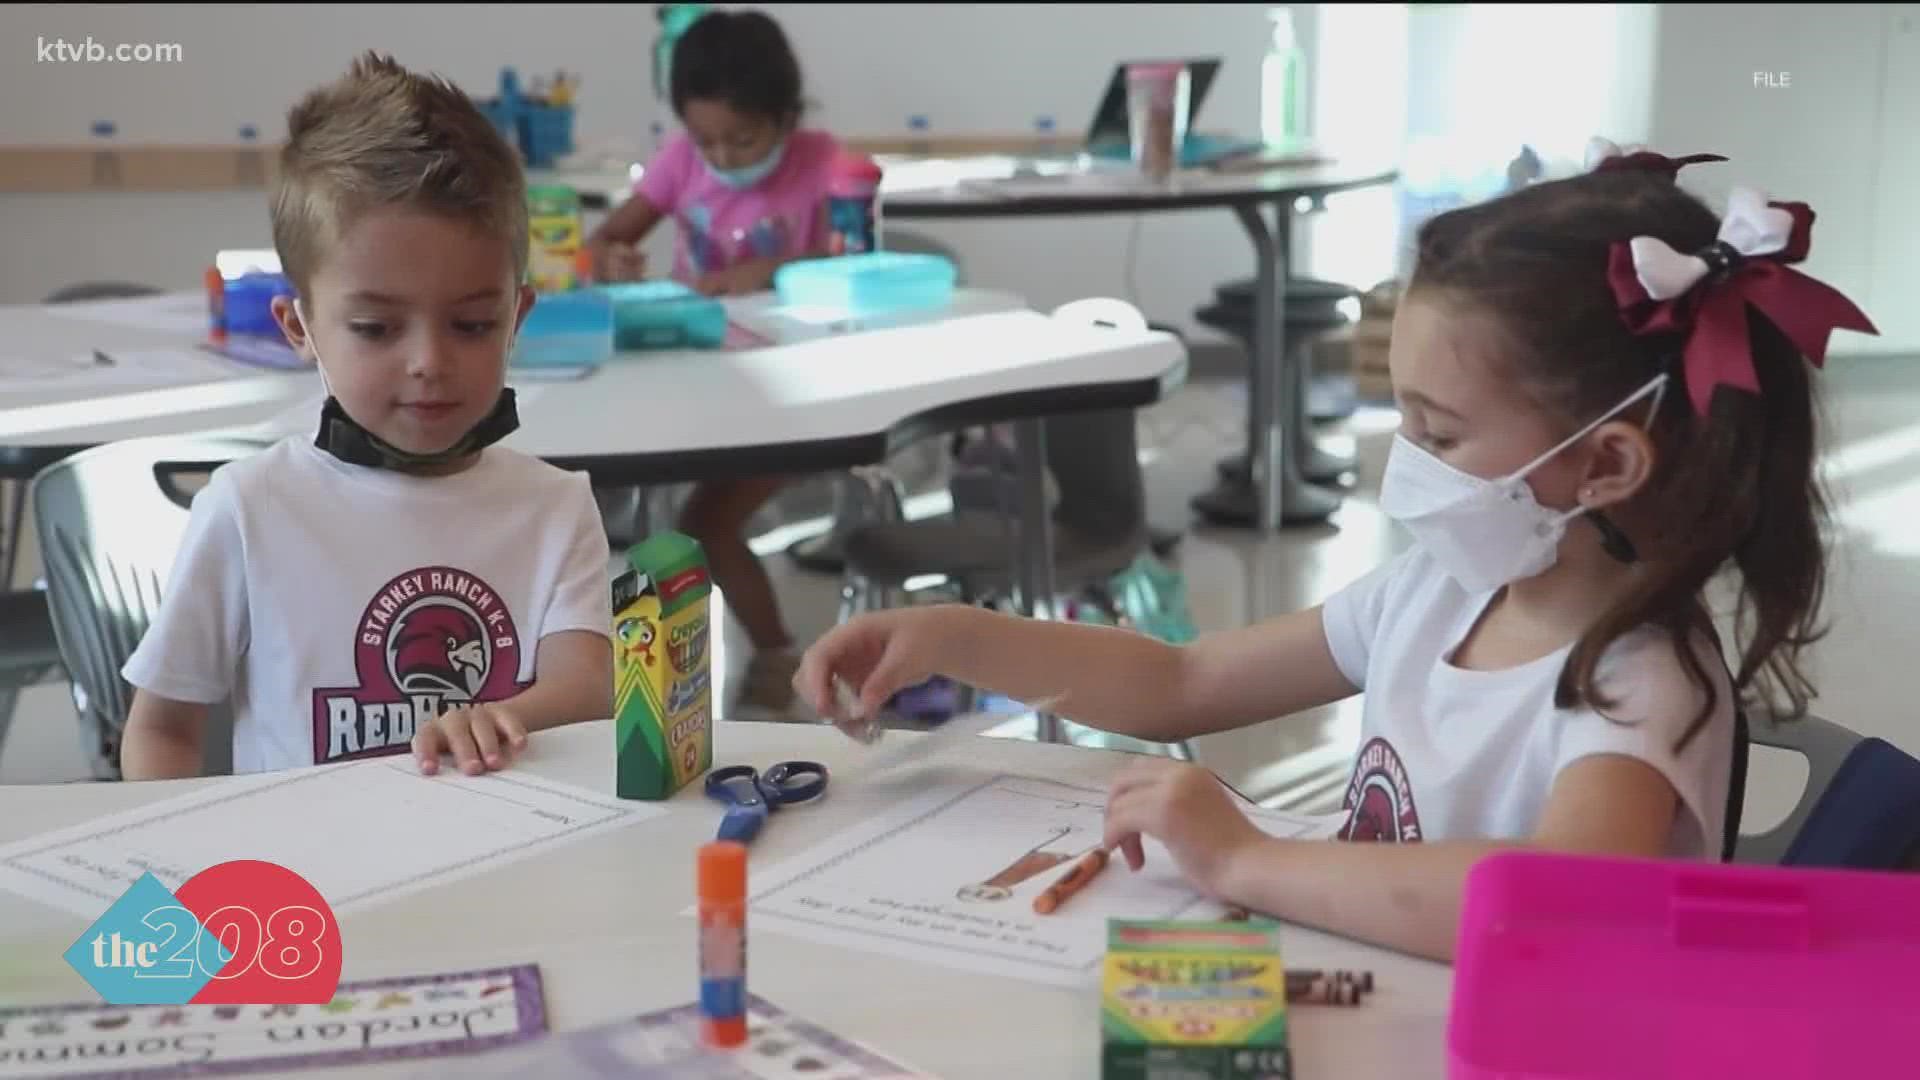 The Boise School District will offer a half-day kindergarten program, as long as certain conditions are met.